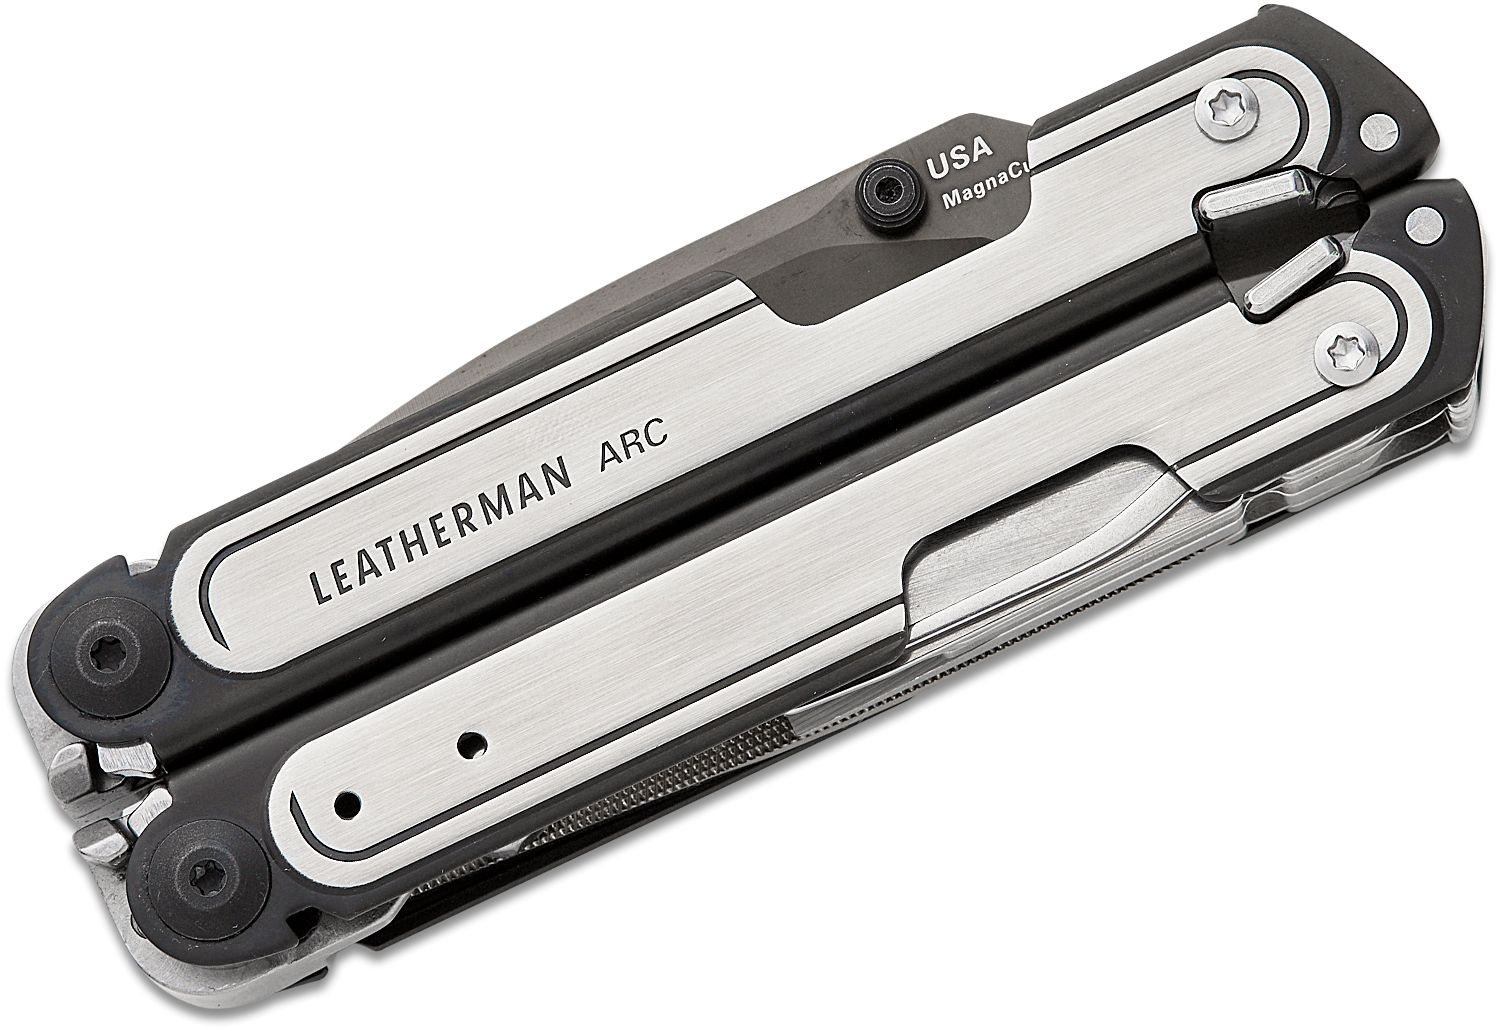 🛠Leatherman ARC with MAGNACUT blade? (real or fake multitool?) SOTM#11 